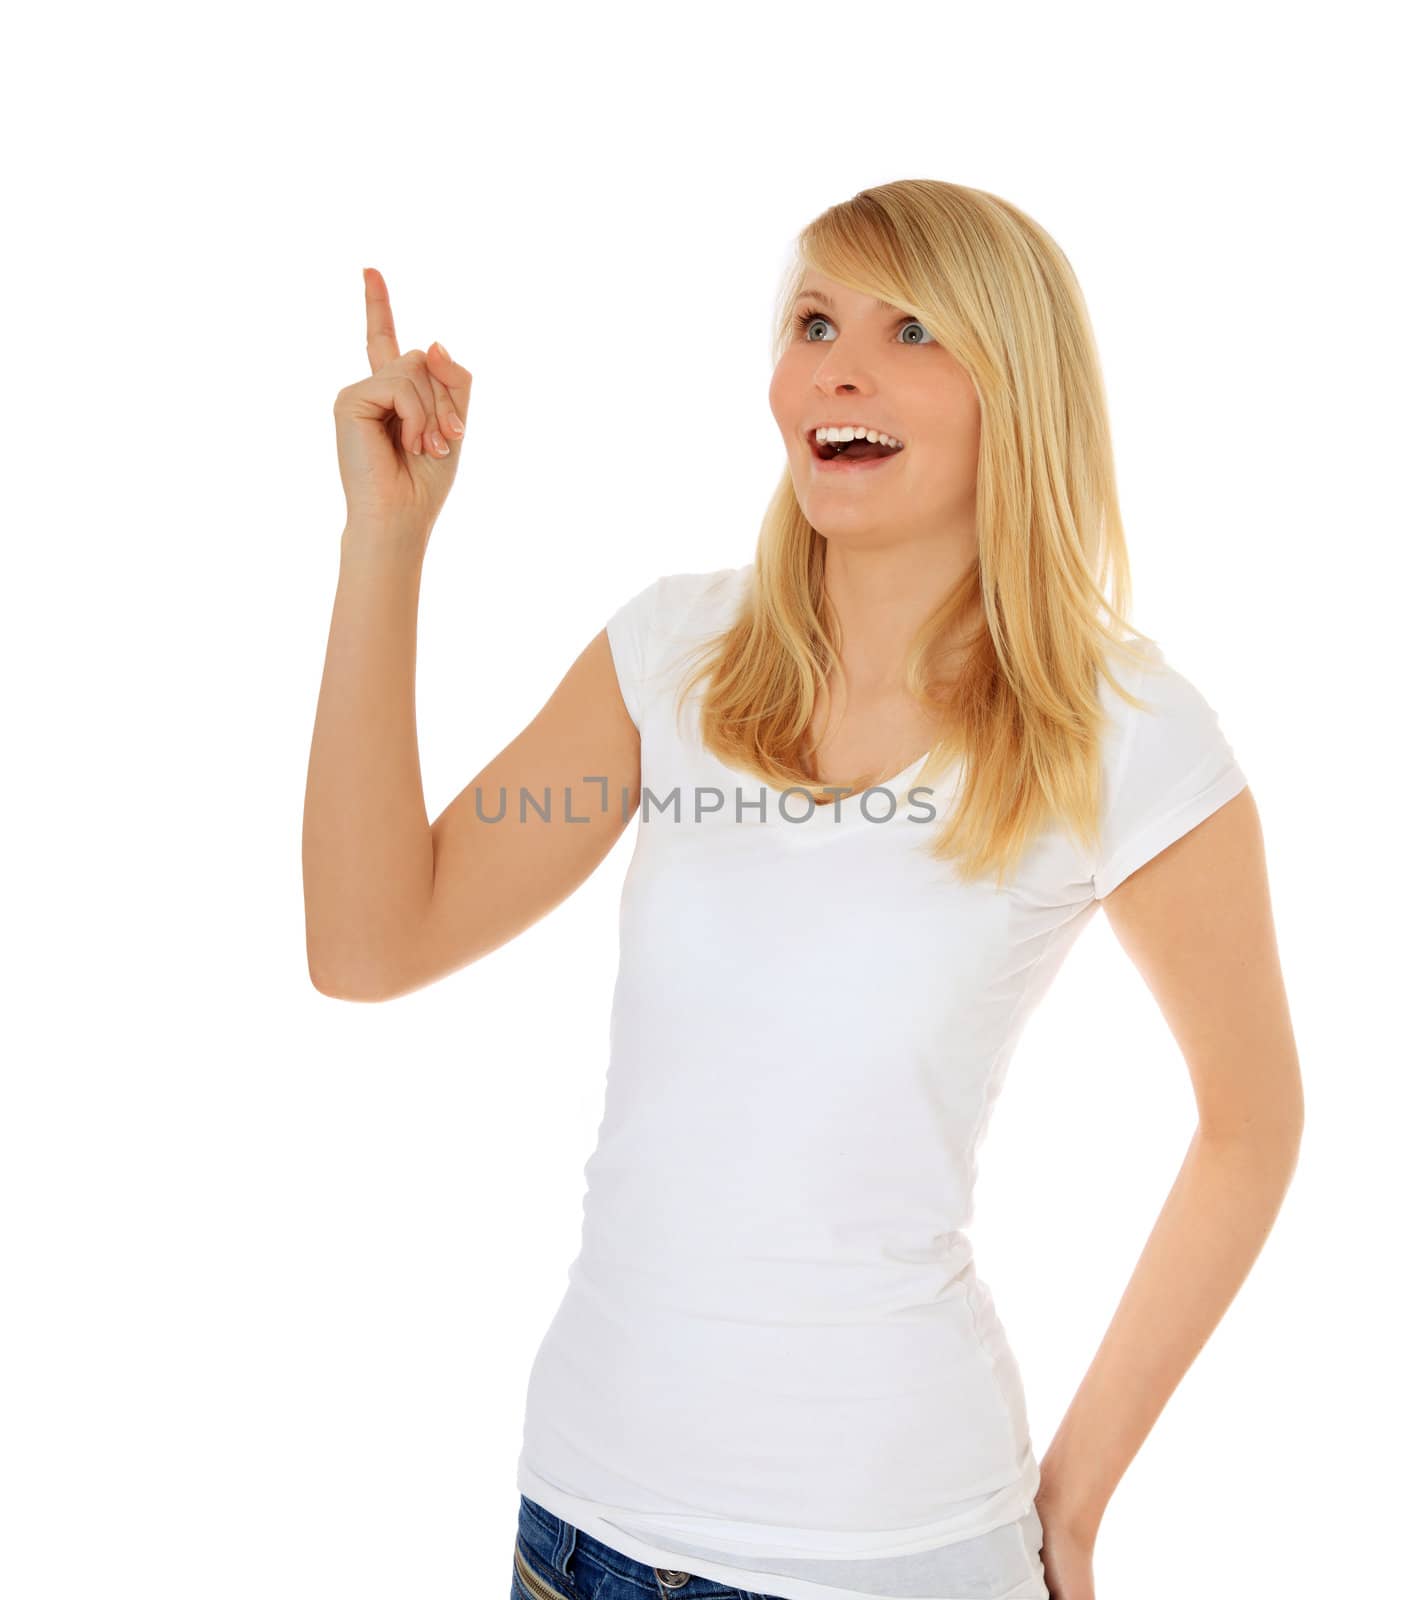 Attractive teenage girl got a great idea. All on white background.